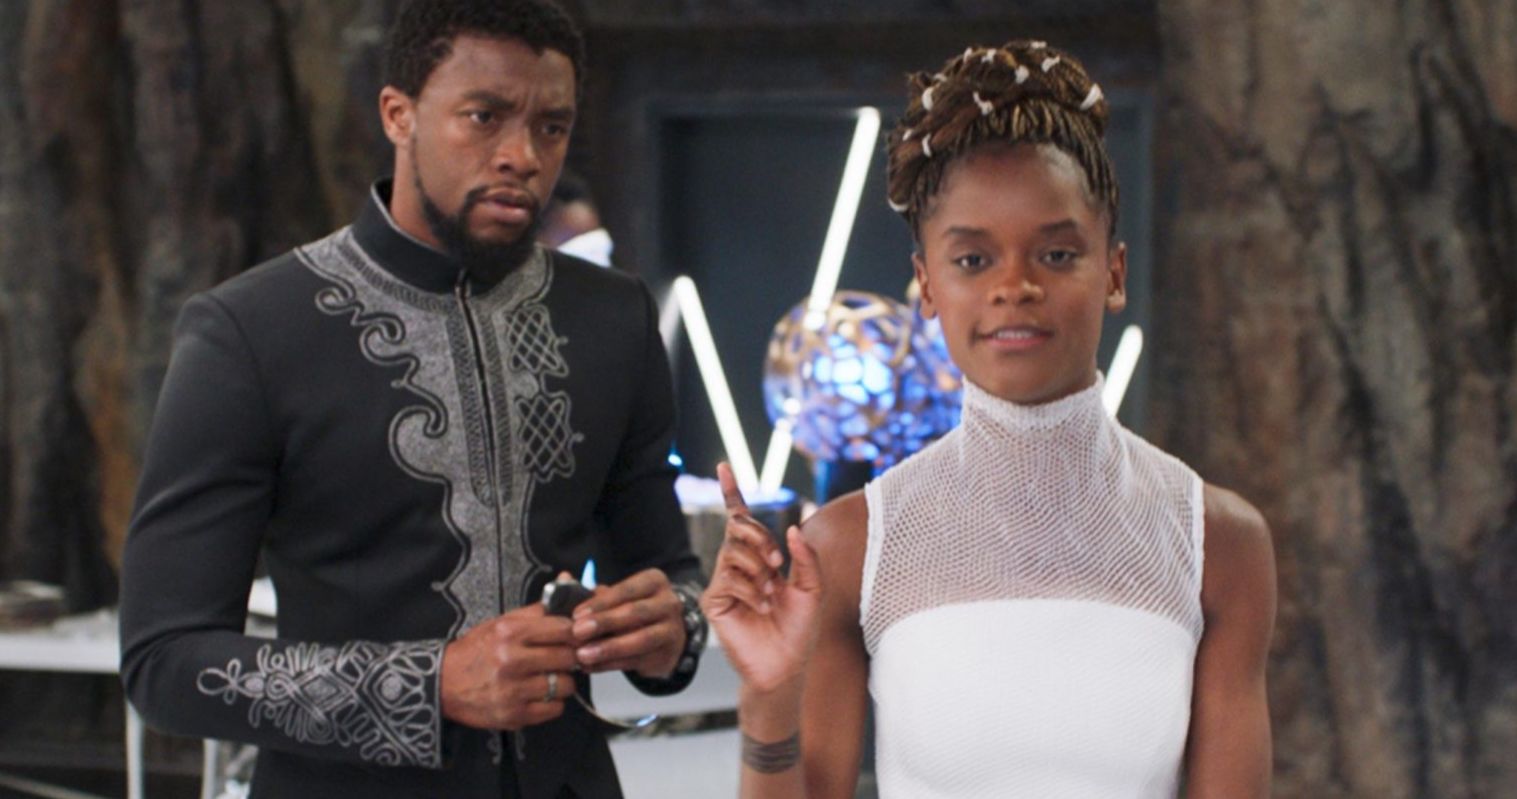 Chadwick Boseman Gets Heartfelt Tribute from Black Panther Co-Star Letitia Wright